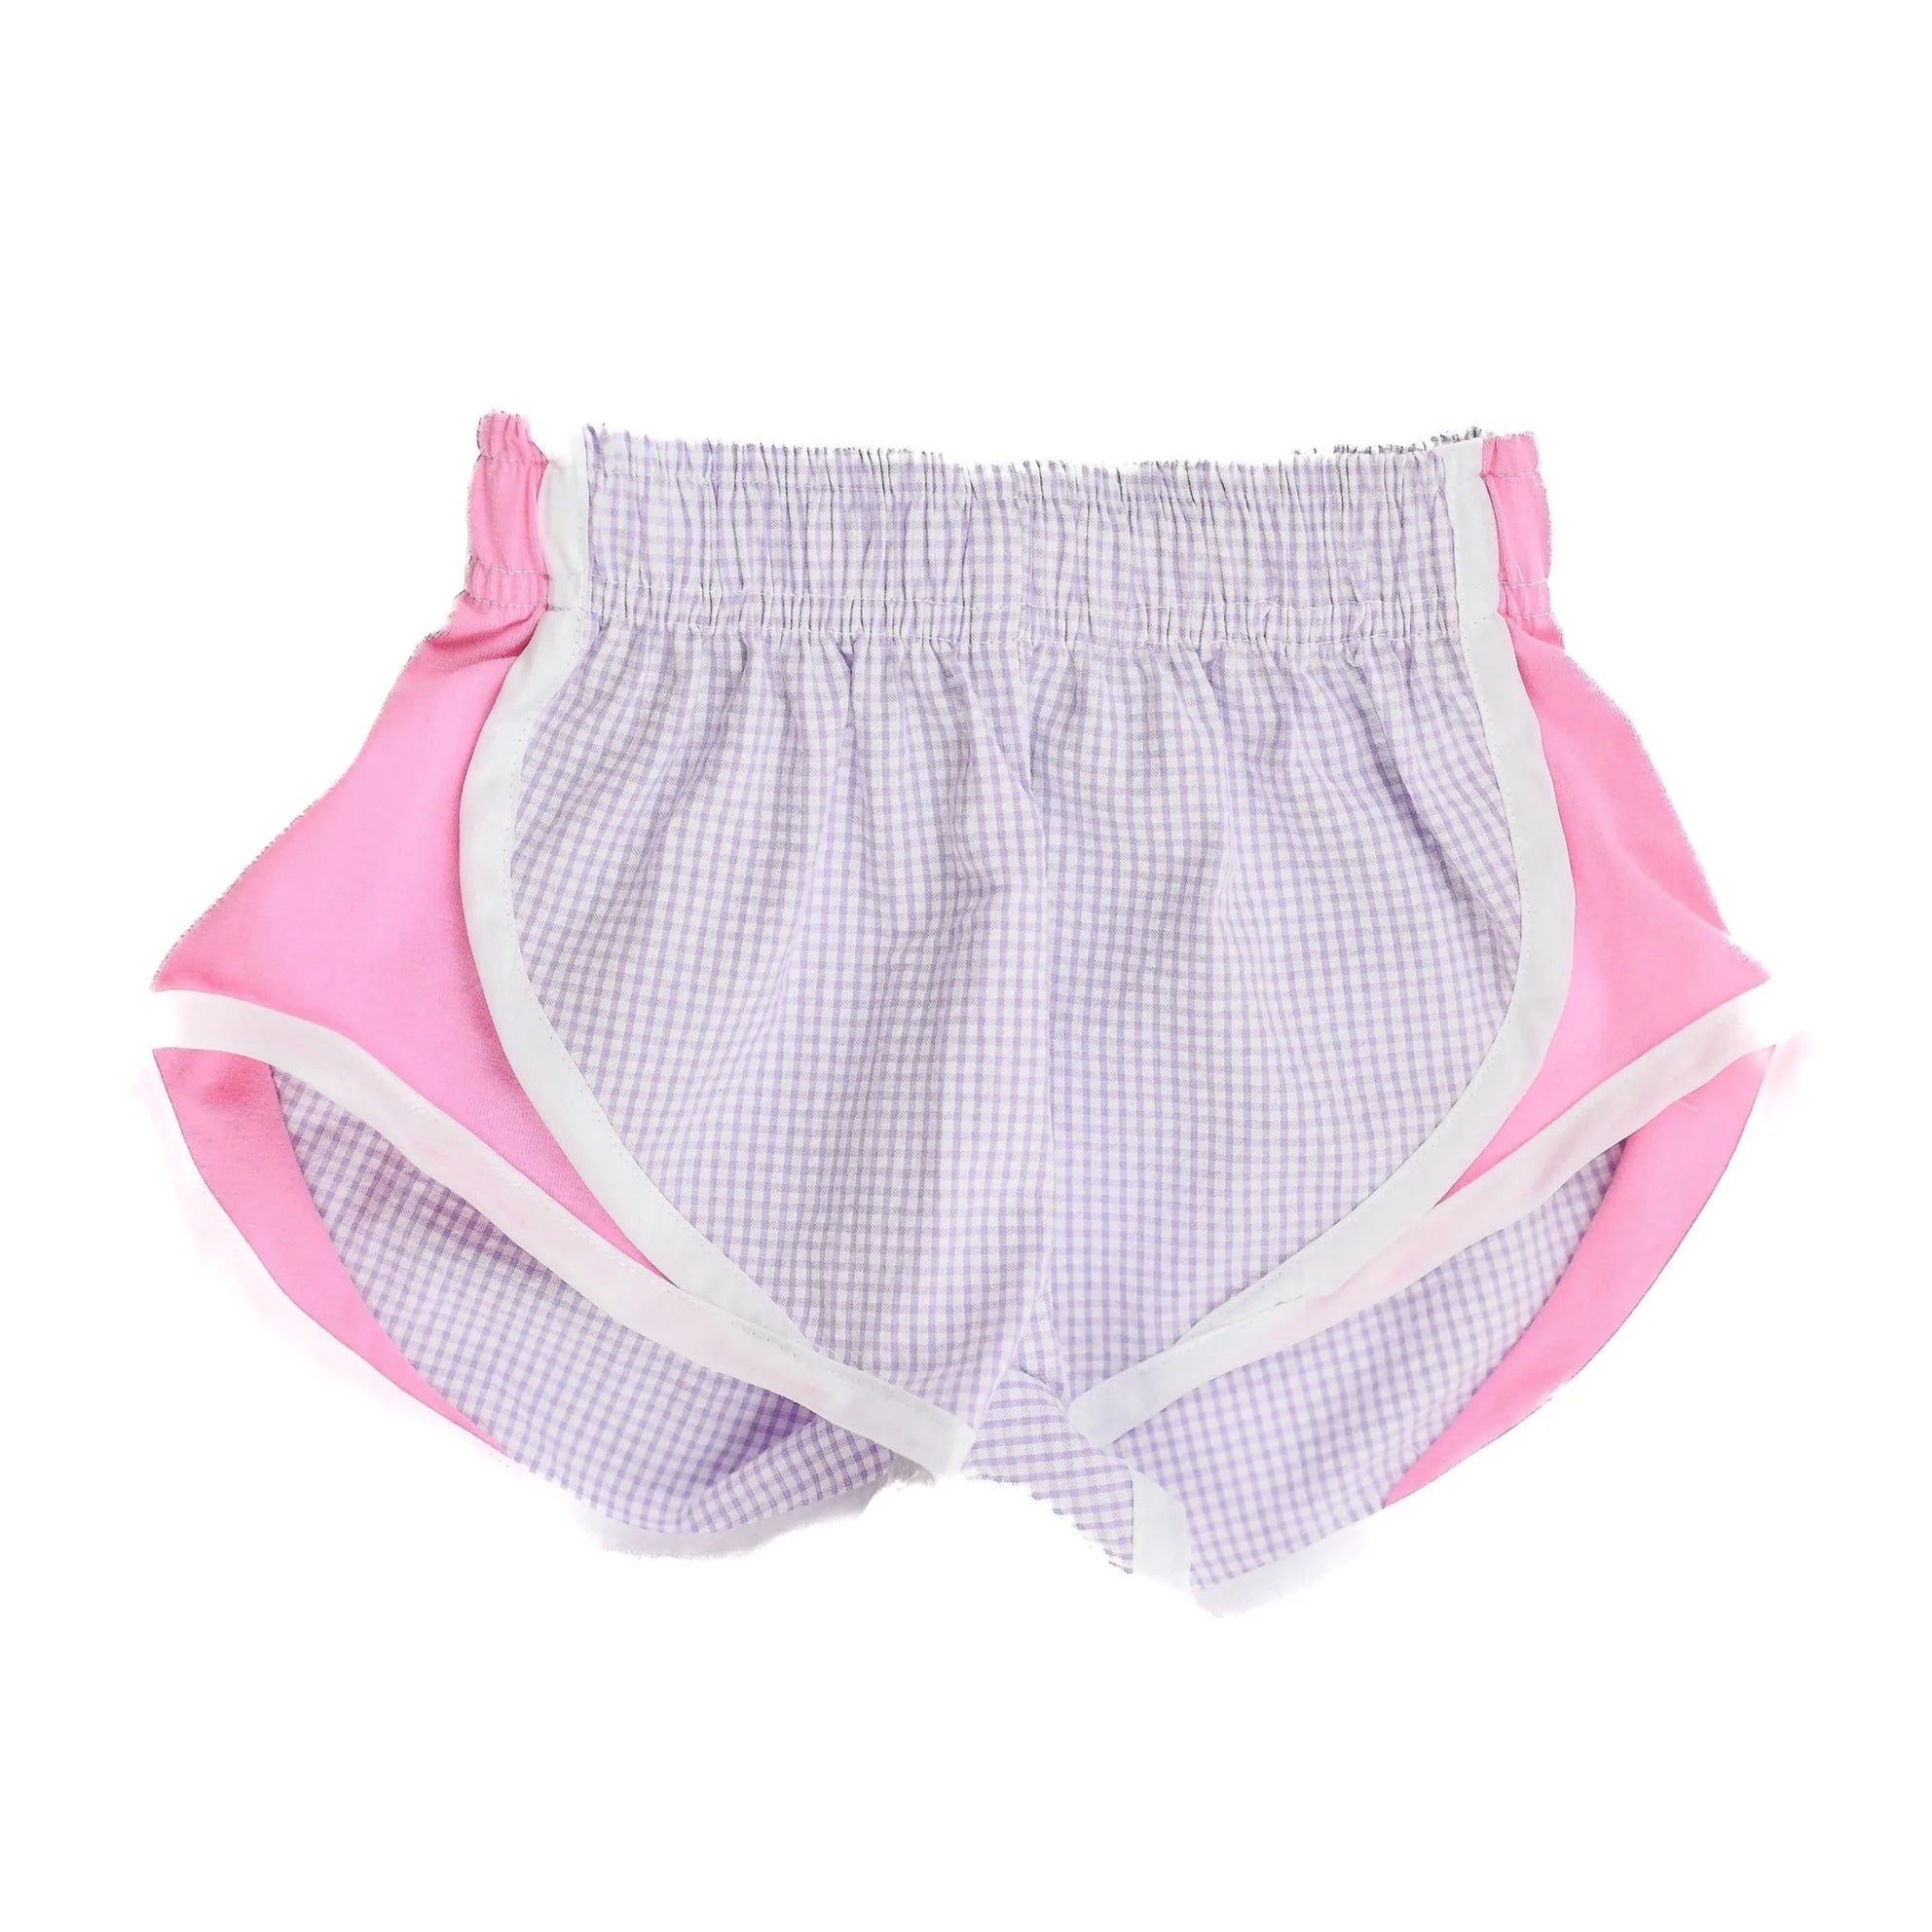 Fantasia Too Athletic Shorts - Lavender Check with Pink Sides | JoJo Mommy